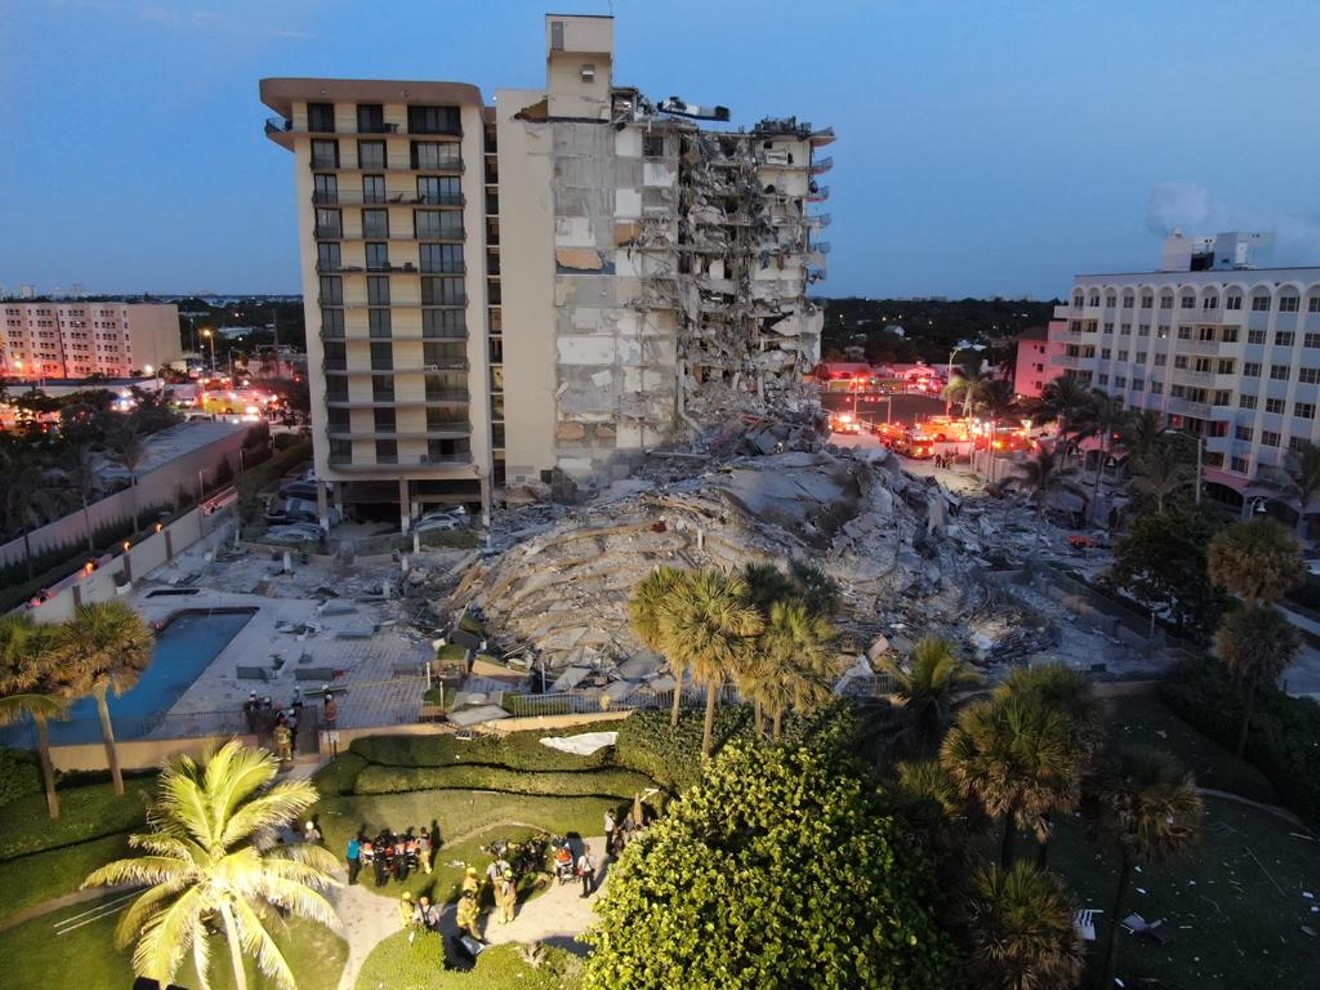 An early-morning view of the devastation from the Champlain Towers condo collapse in Surfside.